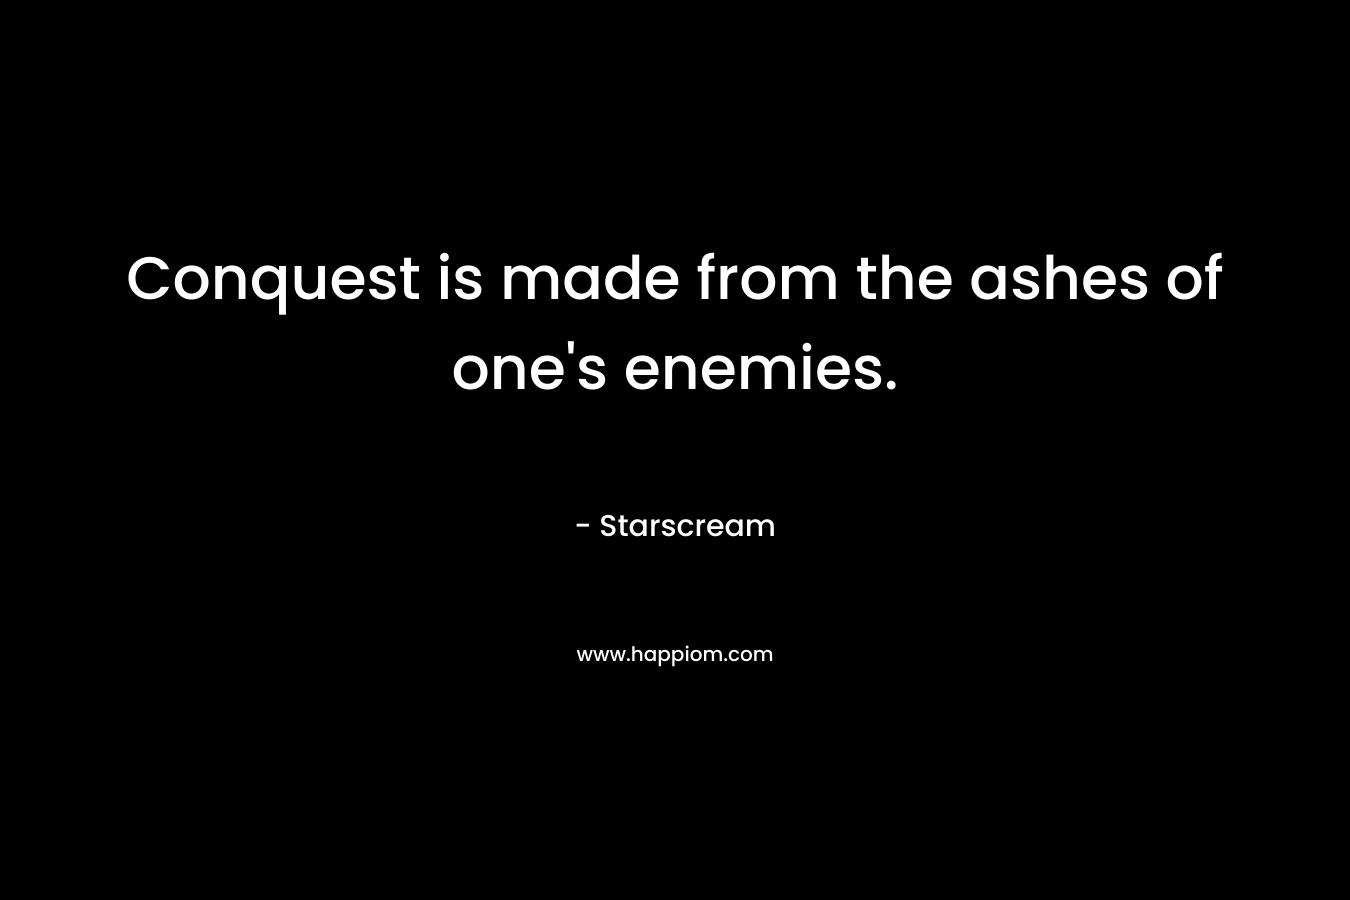 Conquest is made from the ashes of one’s enemies. – Starscream